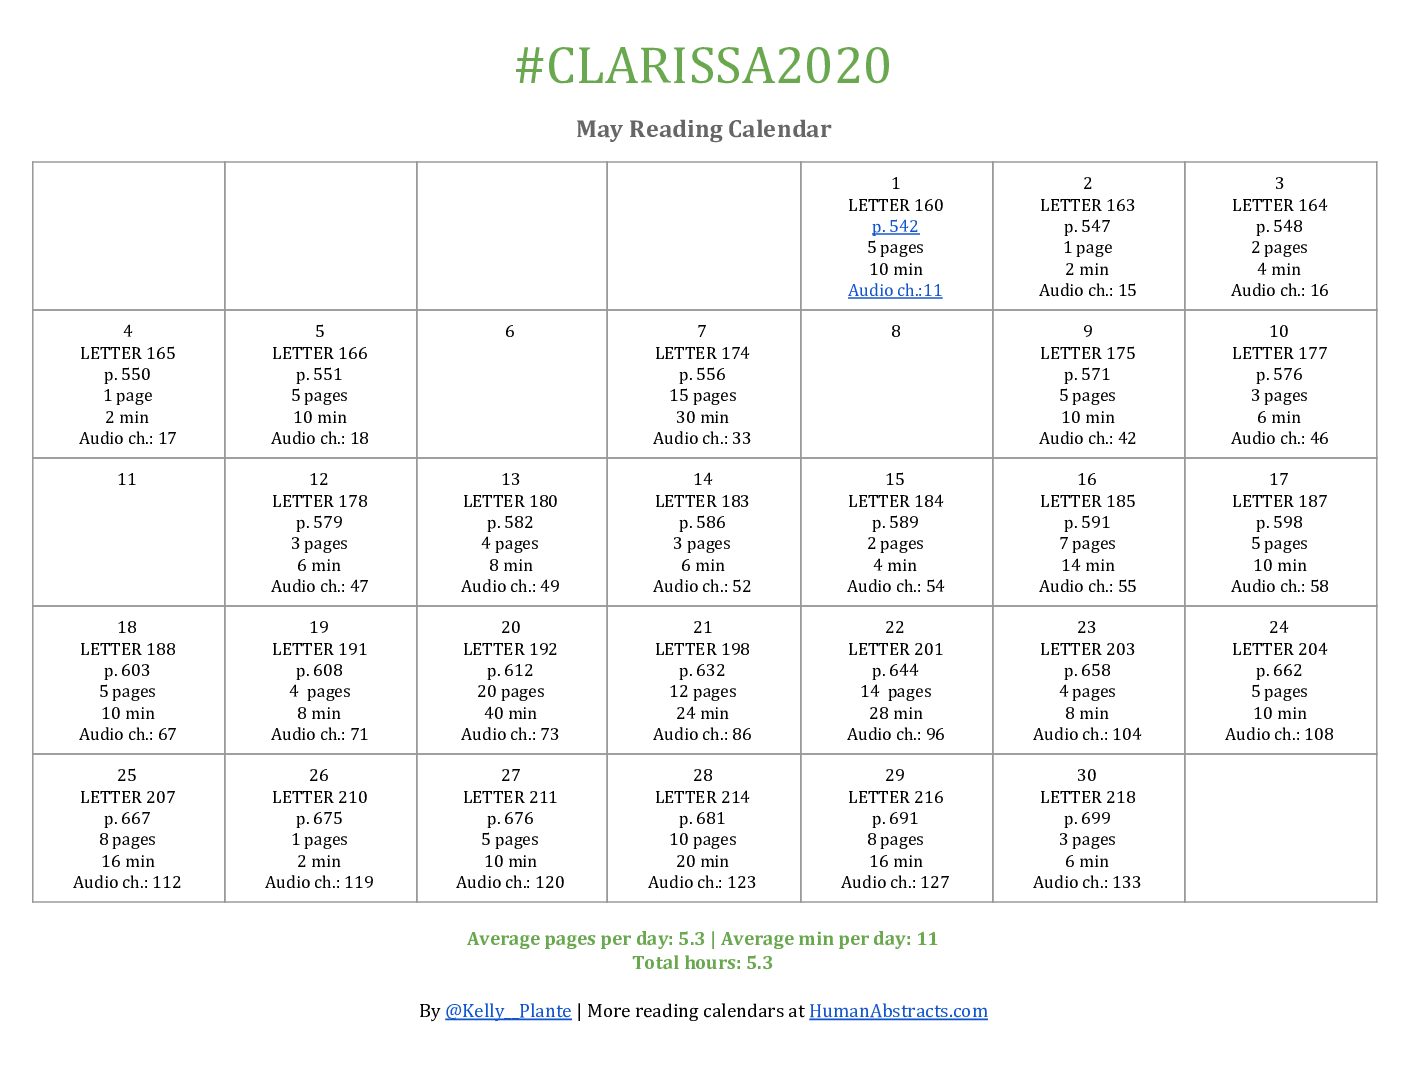 May Reading Calendar for Clarissa2020 Human Abstracts